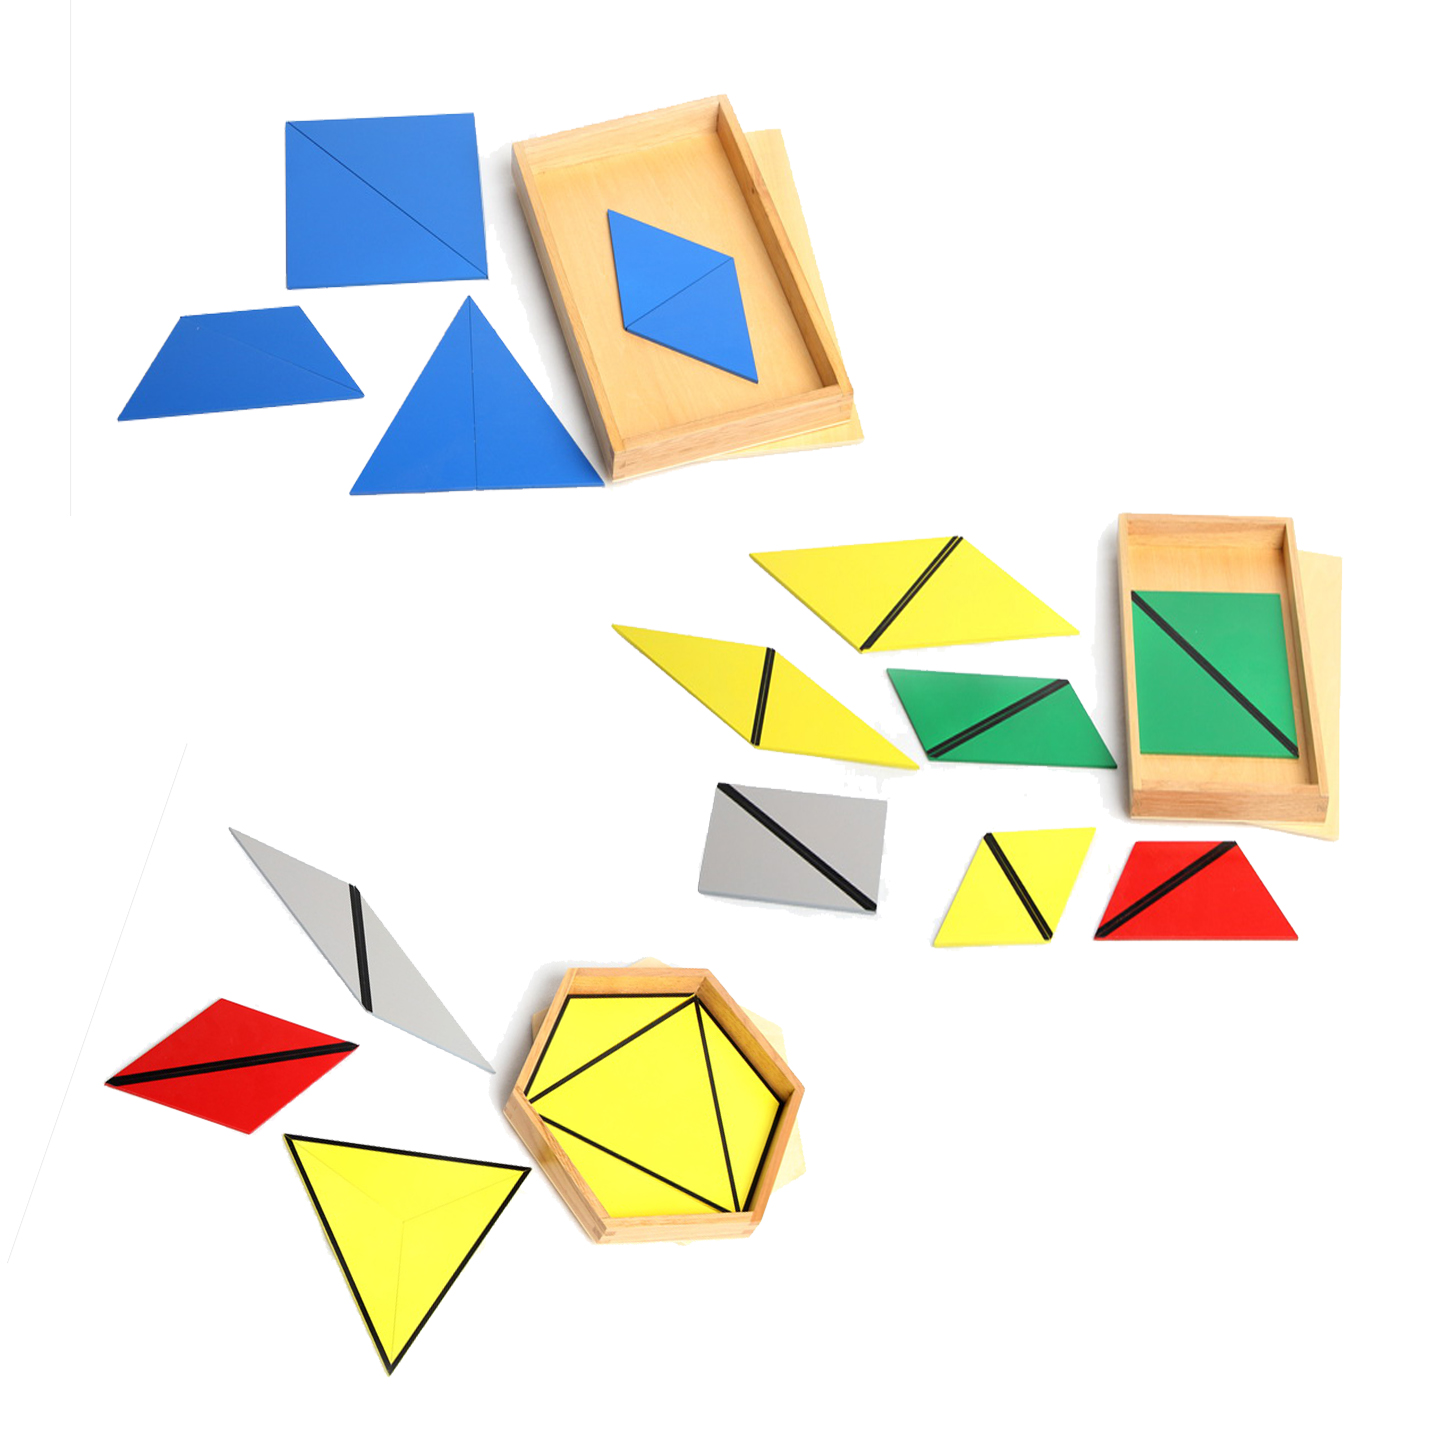 Constructive Triangles - 5 Boxes